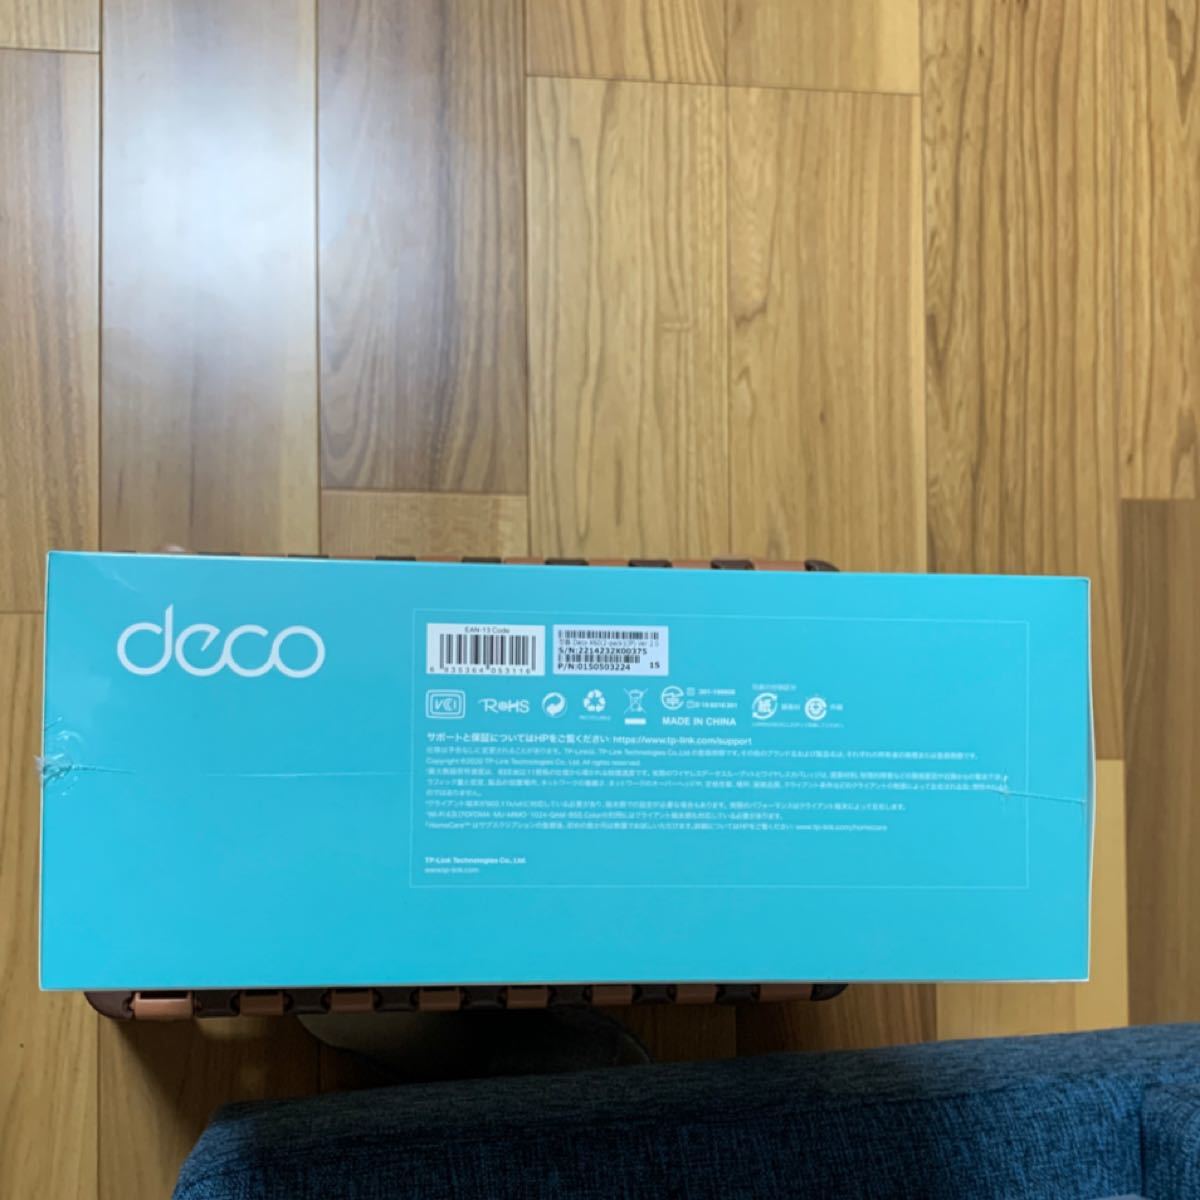 tp-link deco x60 2個セット メッシュWi-Fi